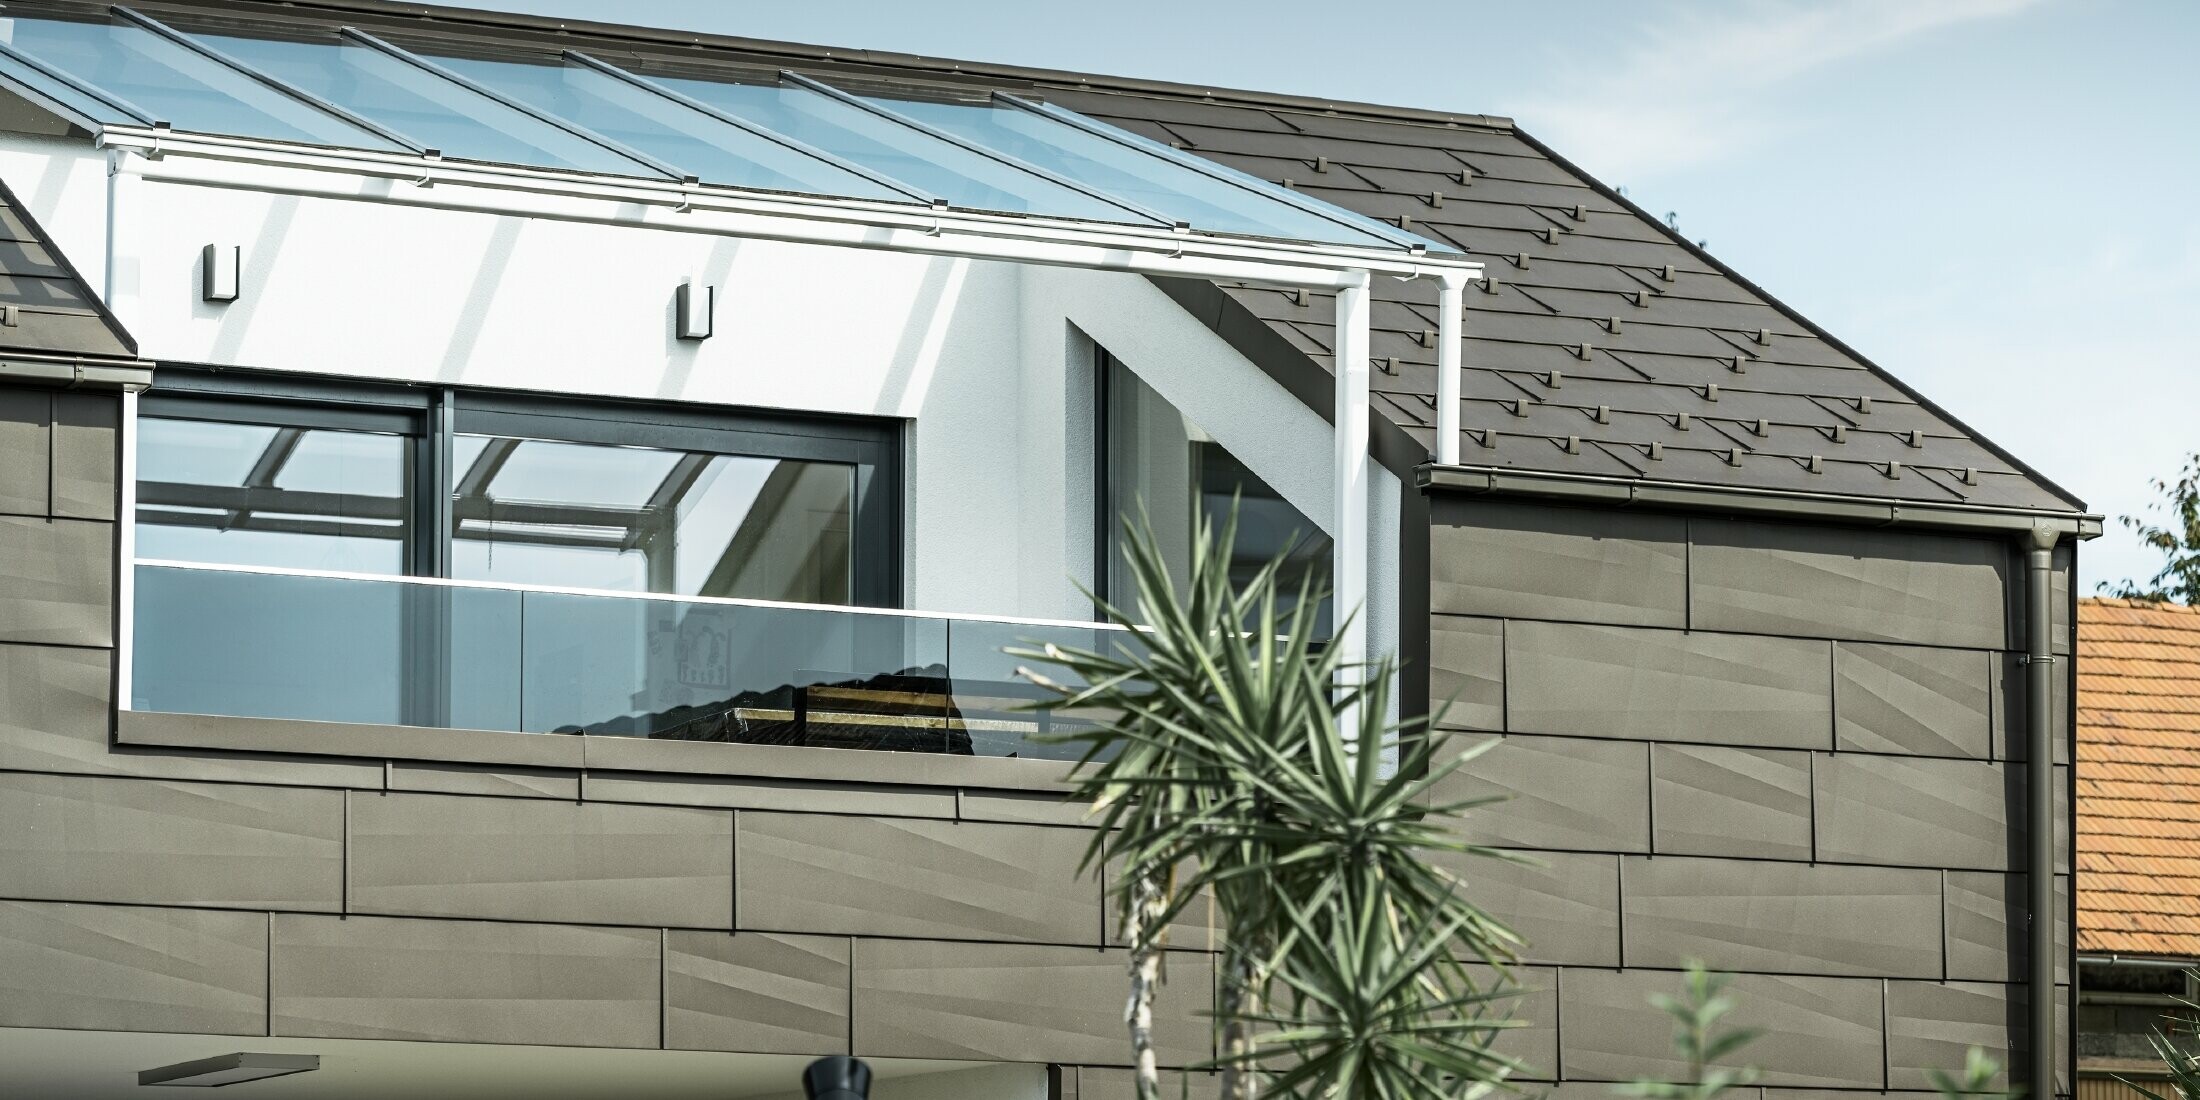 Extension with a roof terrace clad with the PREFA complete system, while the PREFA roof and façade panel FX.12 was used on the roof and façade. In addition, the PREFA box gutter with the PREFA downpipe and the extensive range of accessories in brown are used for roof drainage.